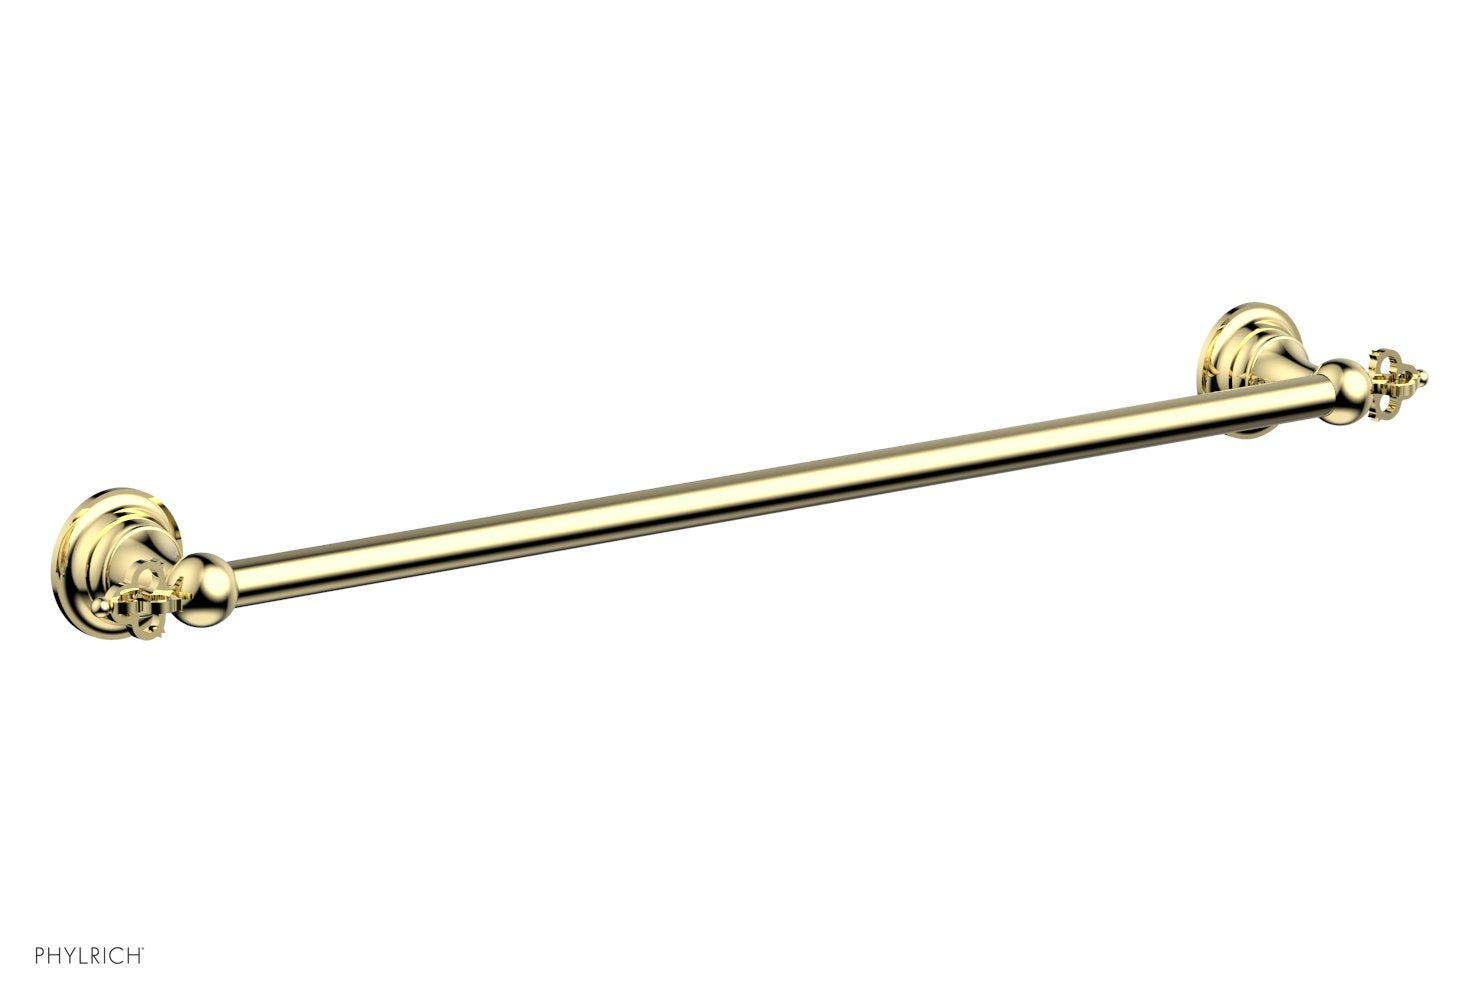 Phylrich COURONNE Towel Bar